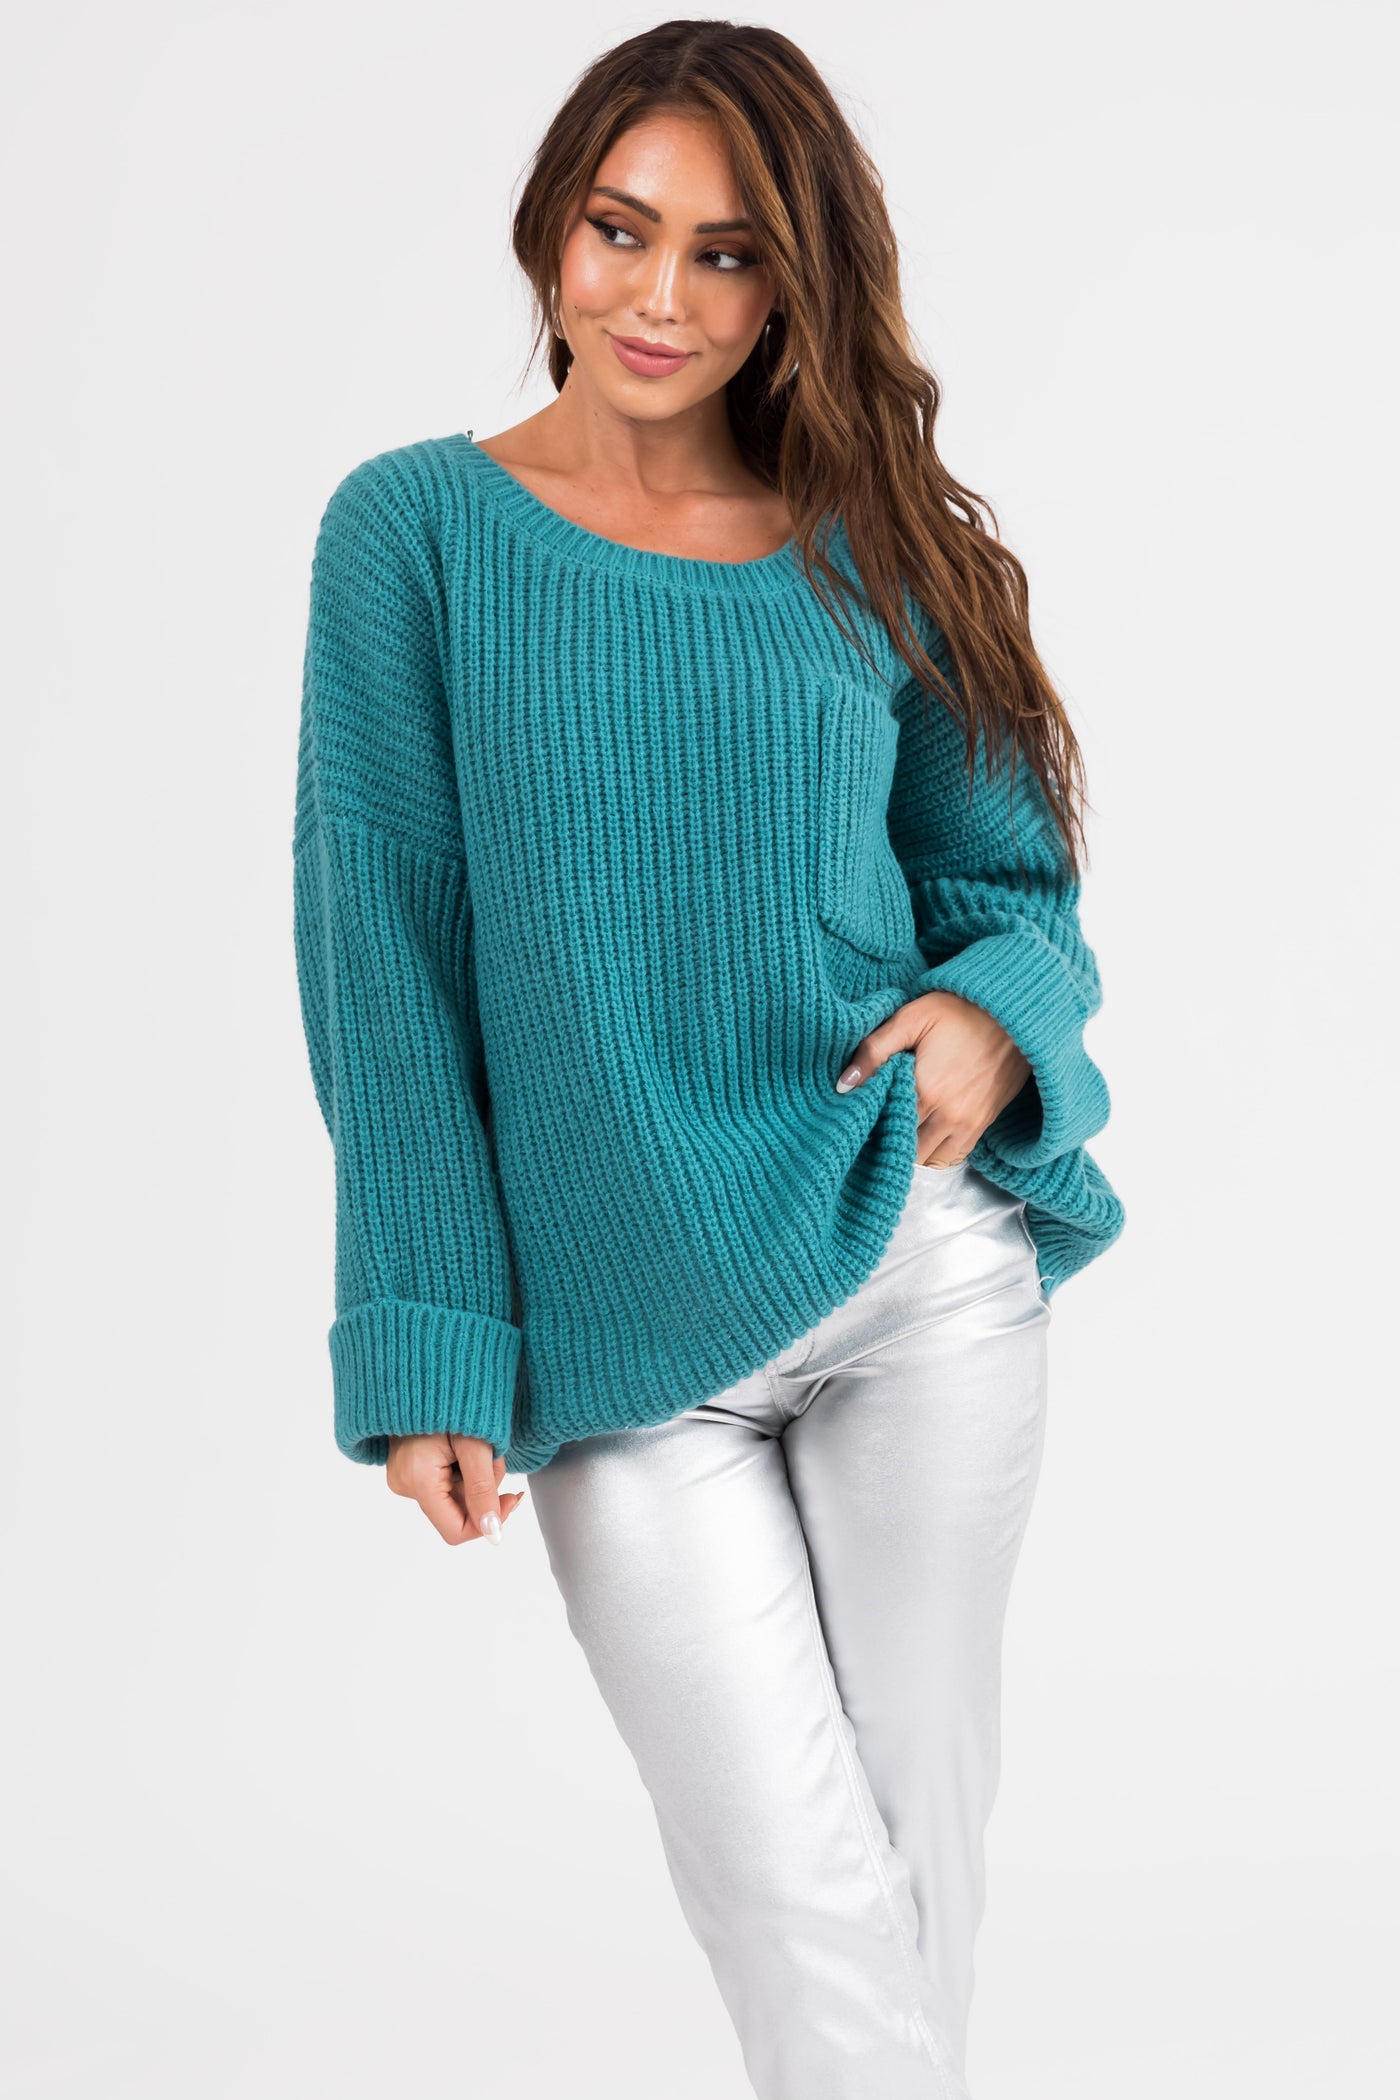 Teal Oversized Chest Pocket Cozy Sweater | Lime Lush